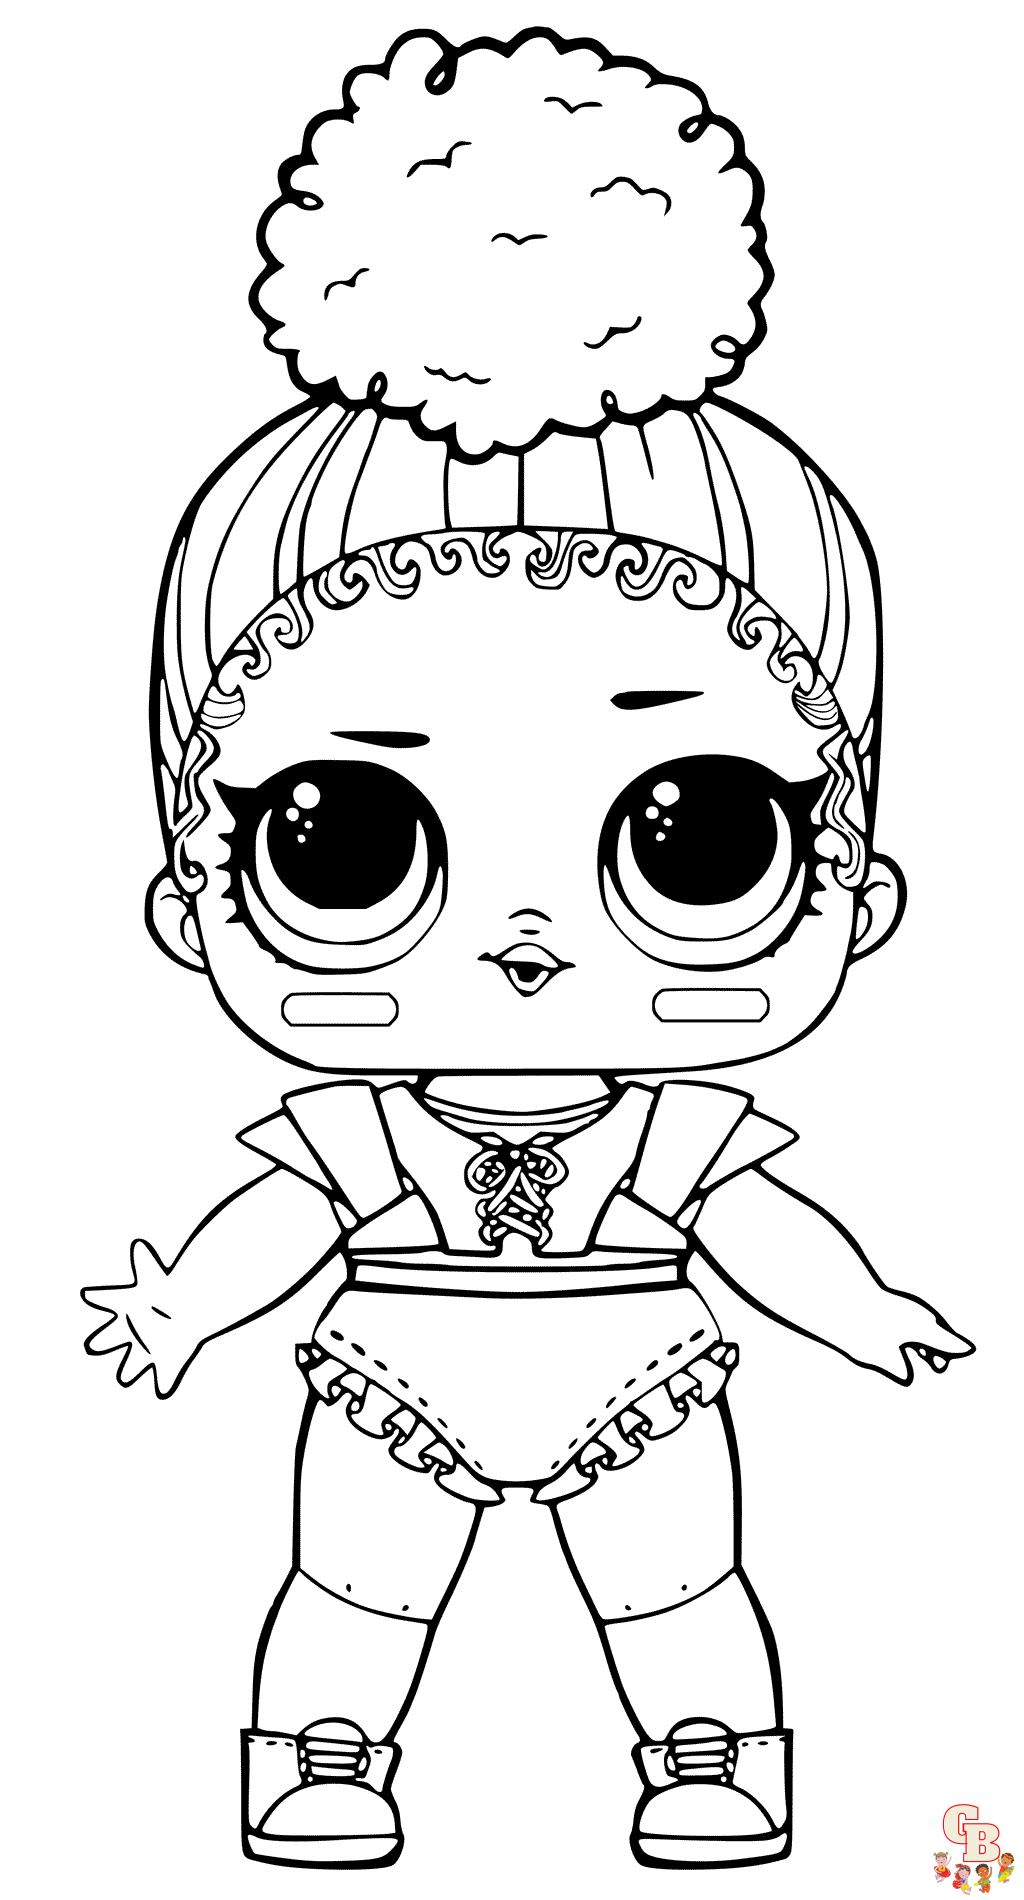 Cute Baby Alive Doll coloring pages to print